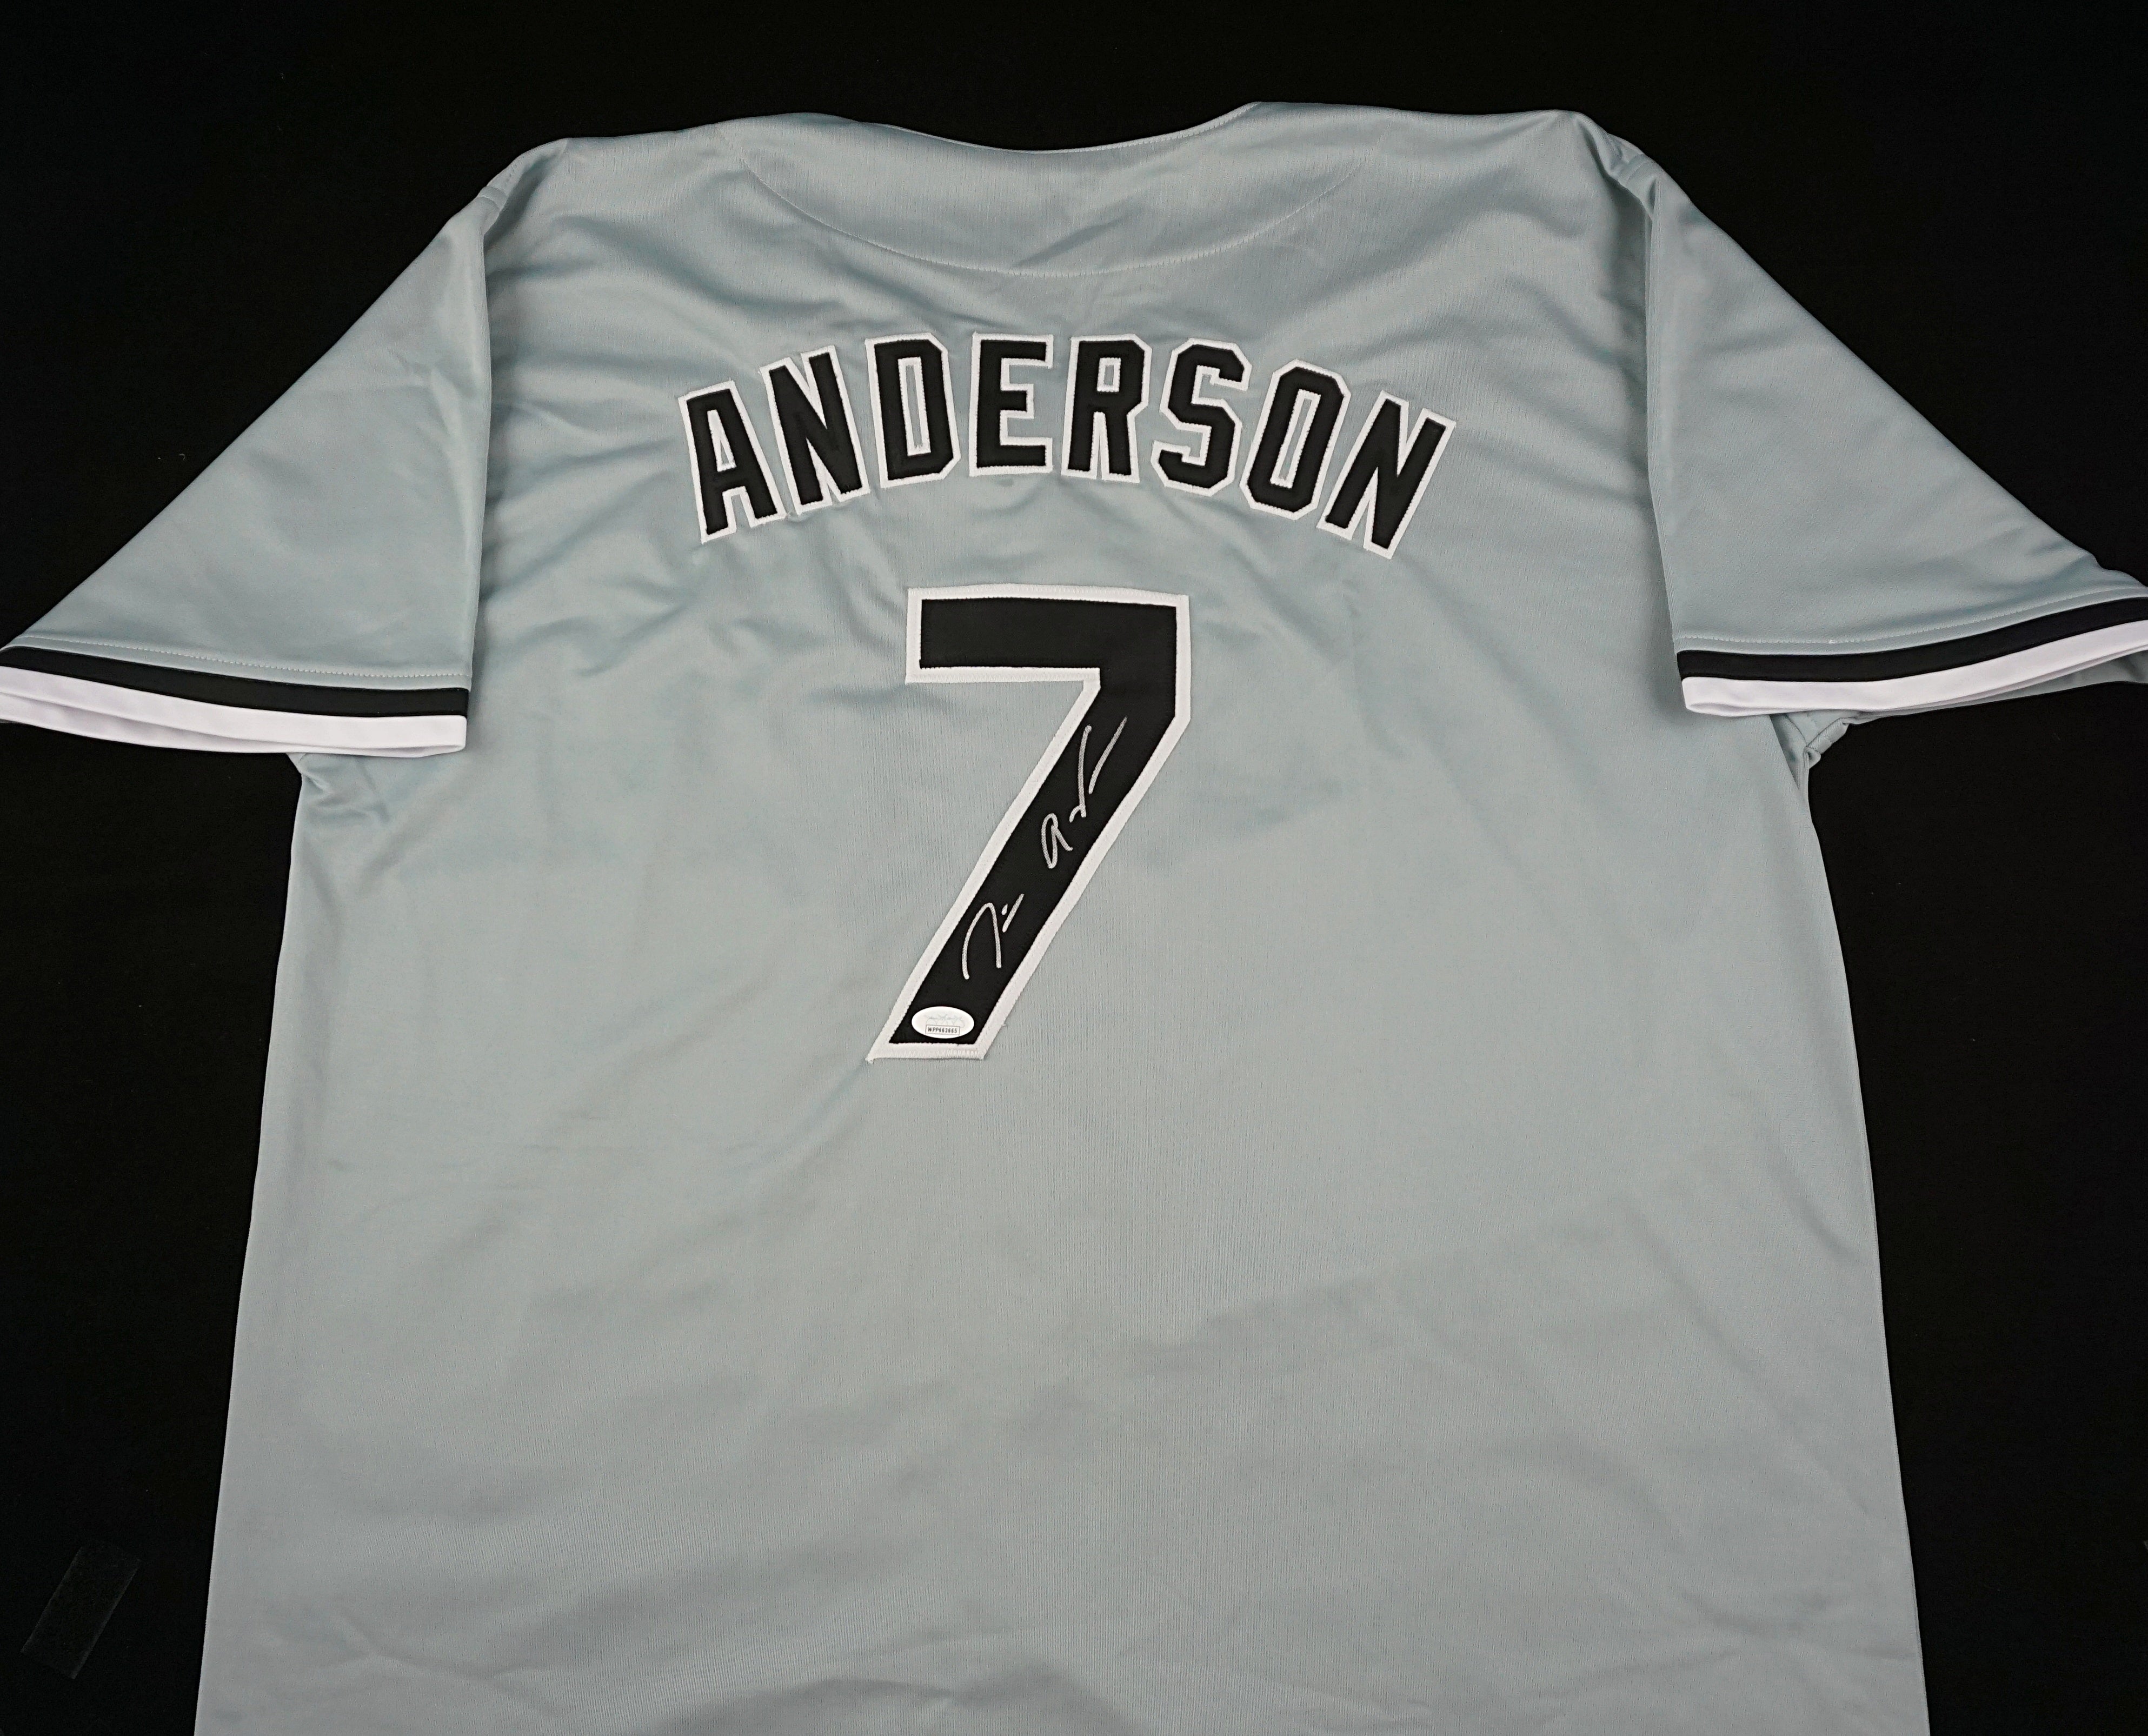 Fanatics Authentic Tim Anderson Chicago White Sox Autographed Nike Authentic Jersey